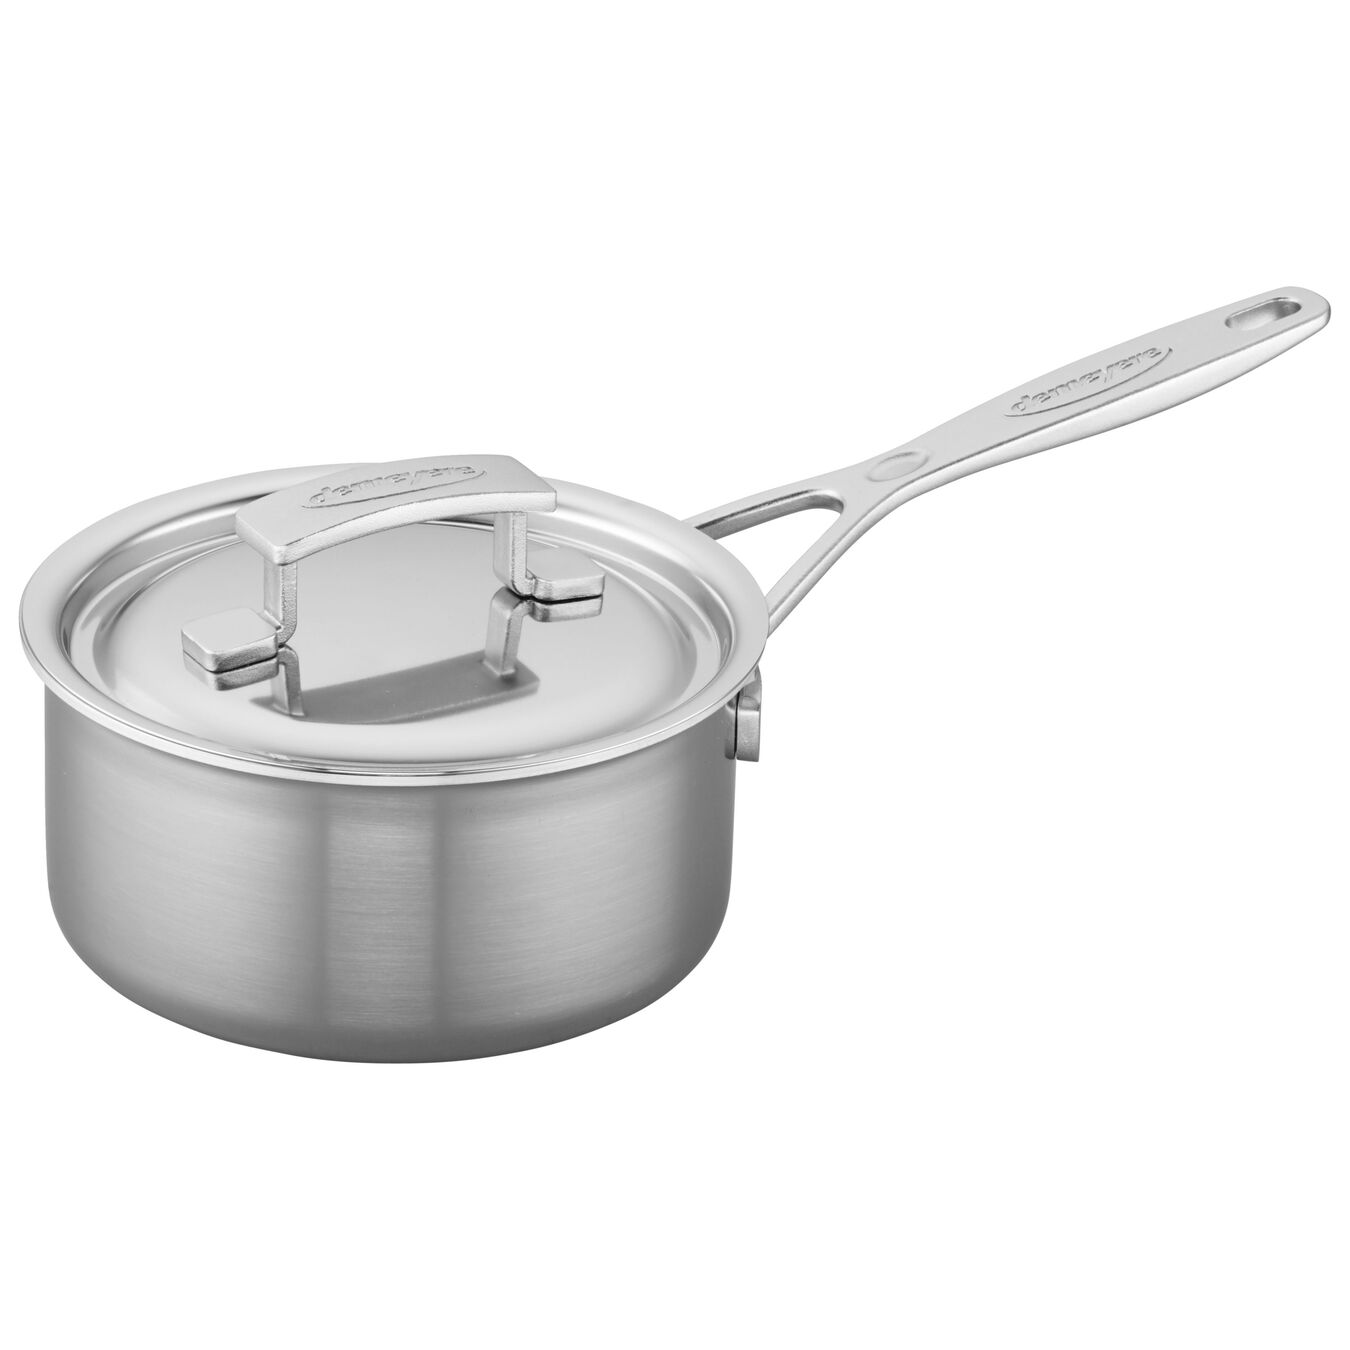 1.5 qt Saucepan with Lid, 18/10 Stainless Steel ,,large 1